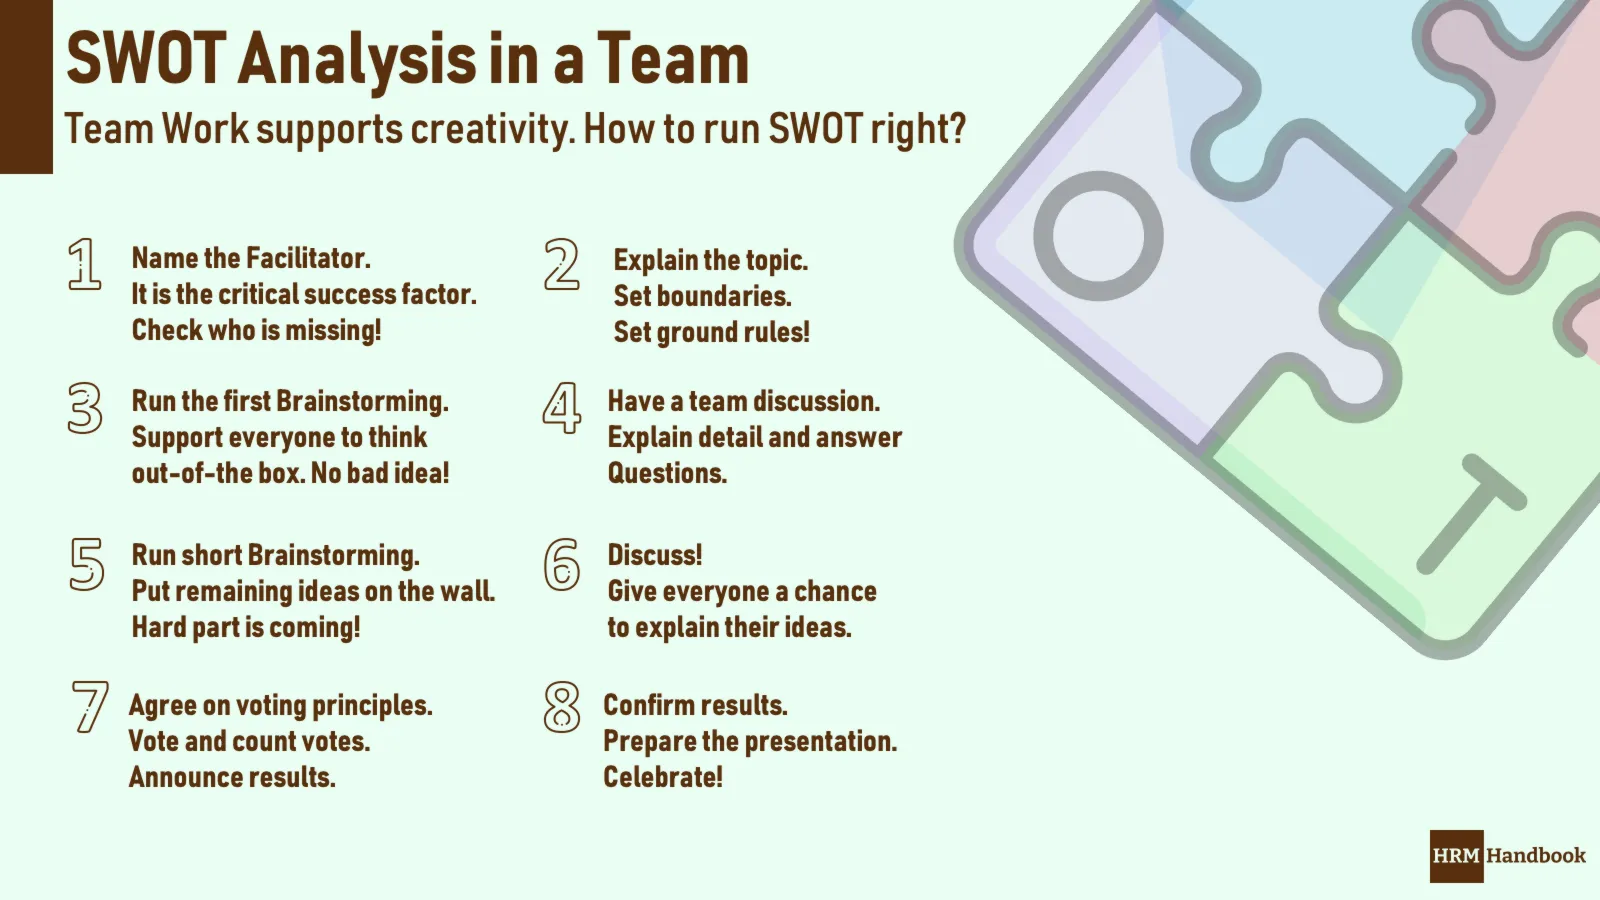 How to run SWOT Analysis in a Team